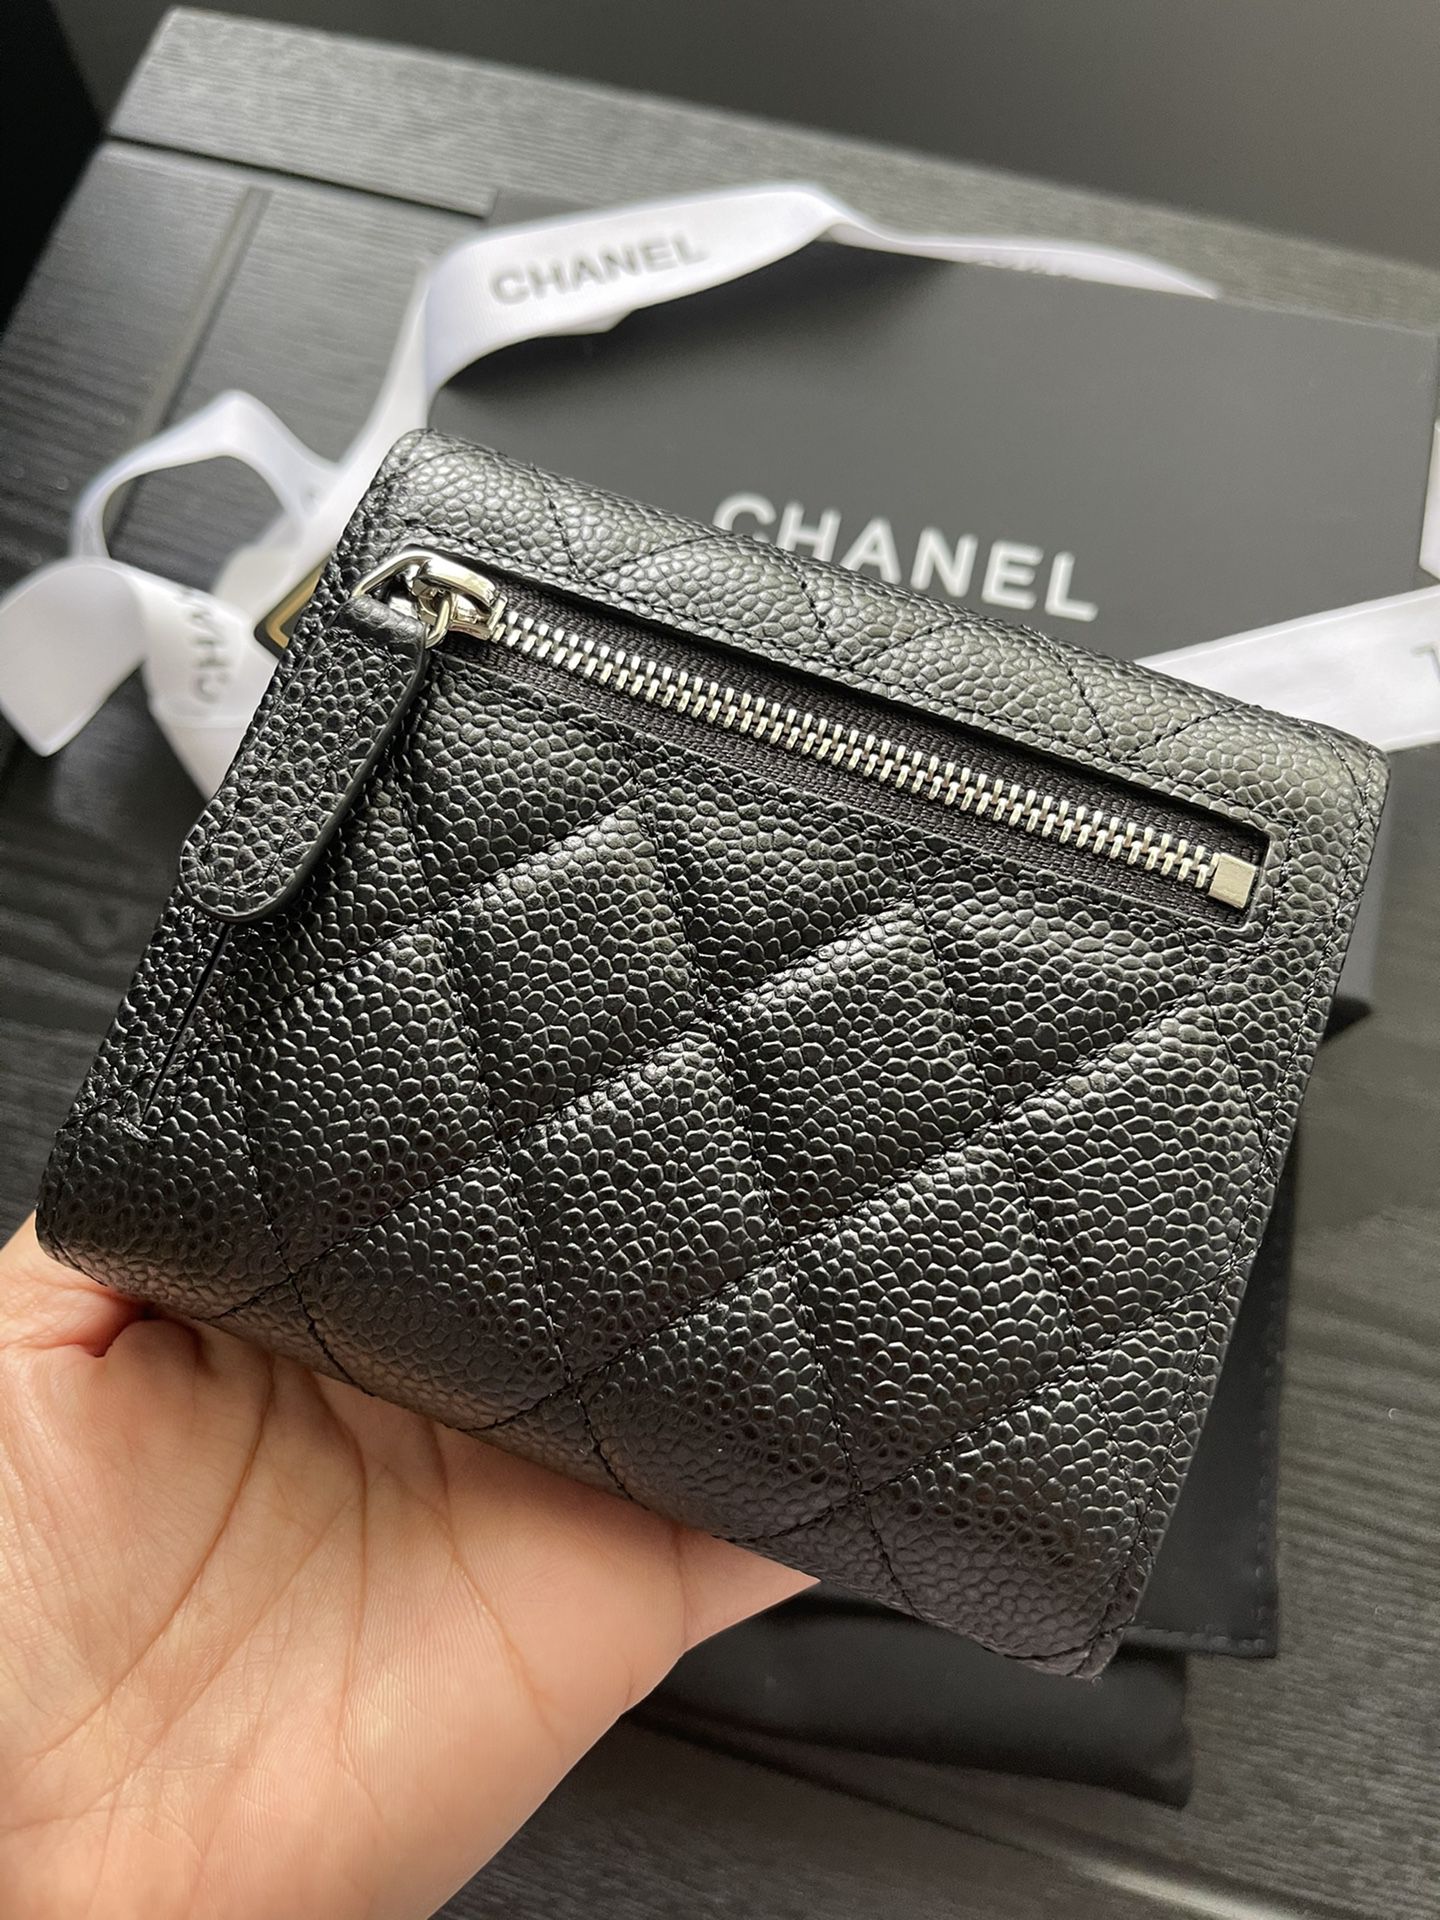 C.H.A.N.E.L Small wallet for Sale in San Leandro, CA - OfferUp